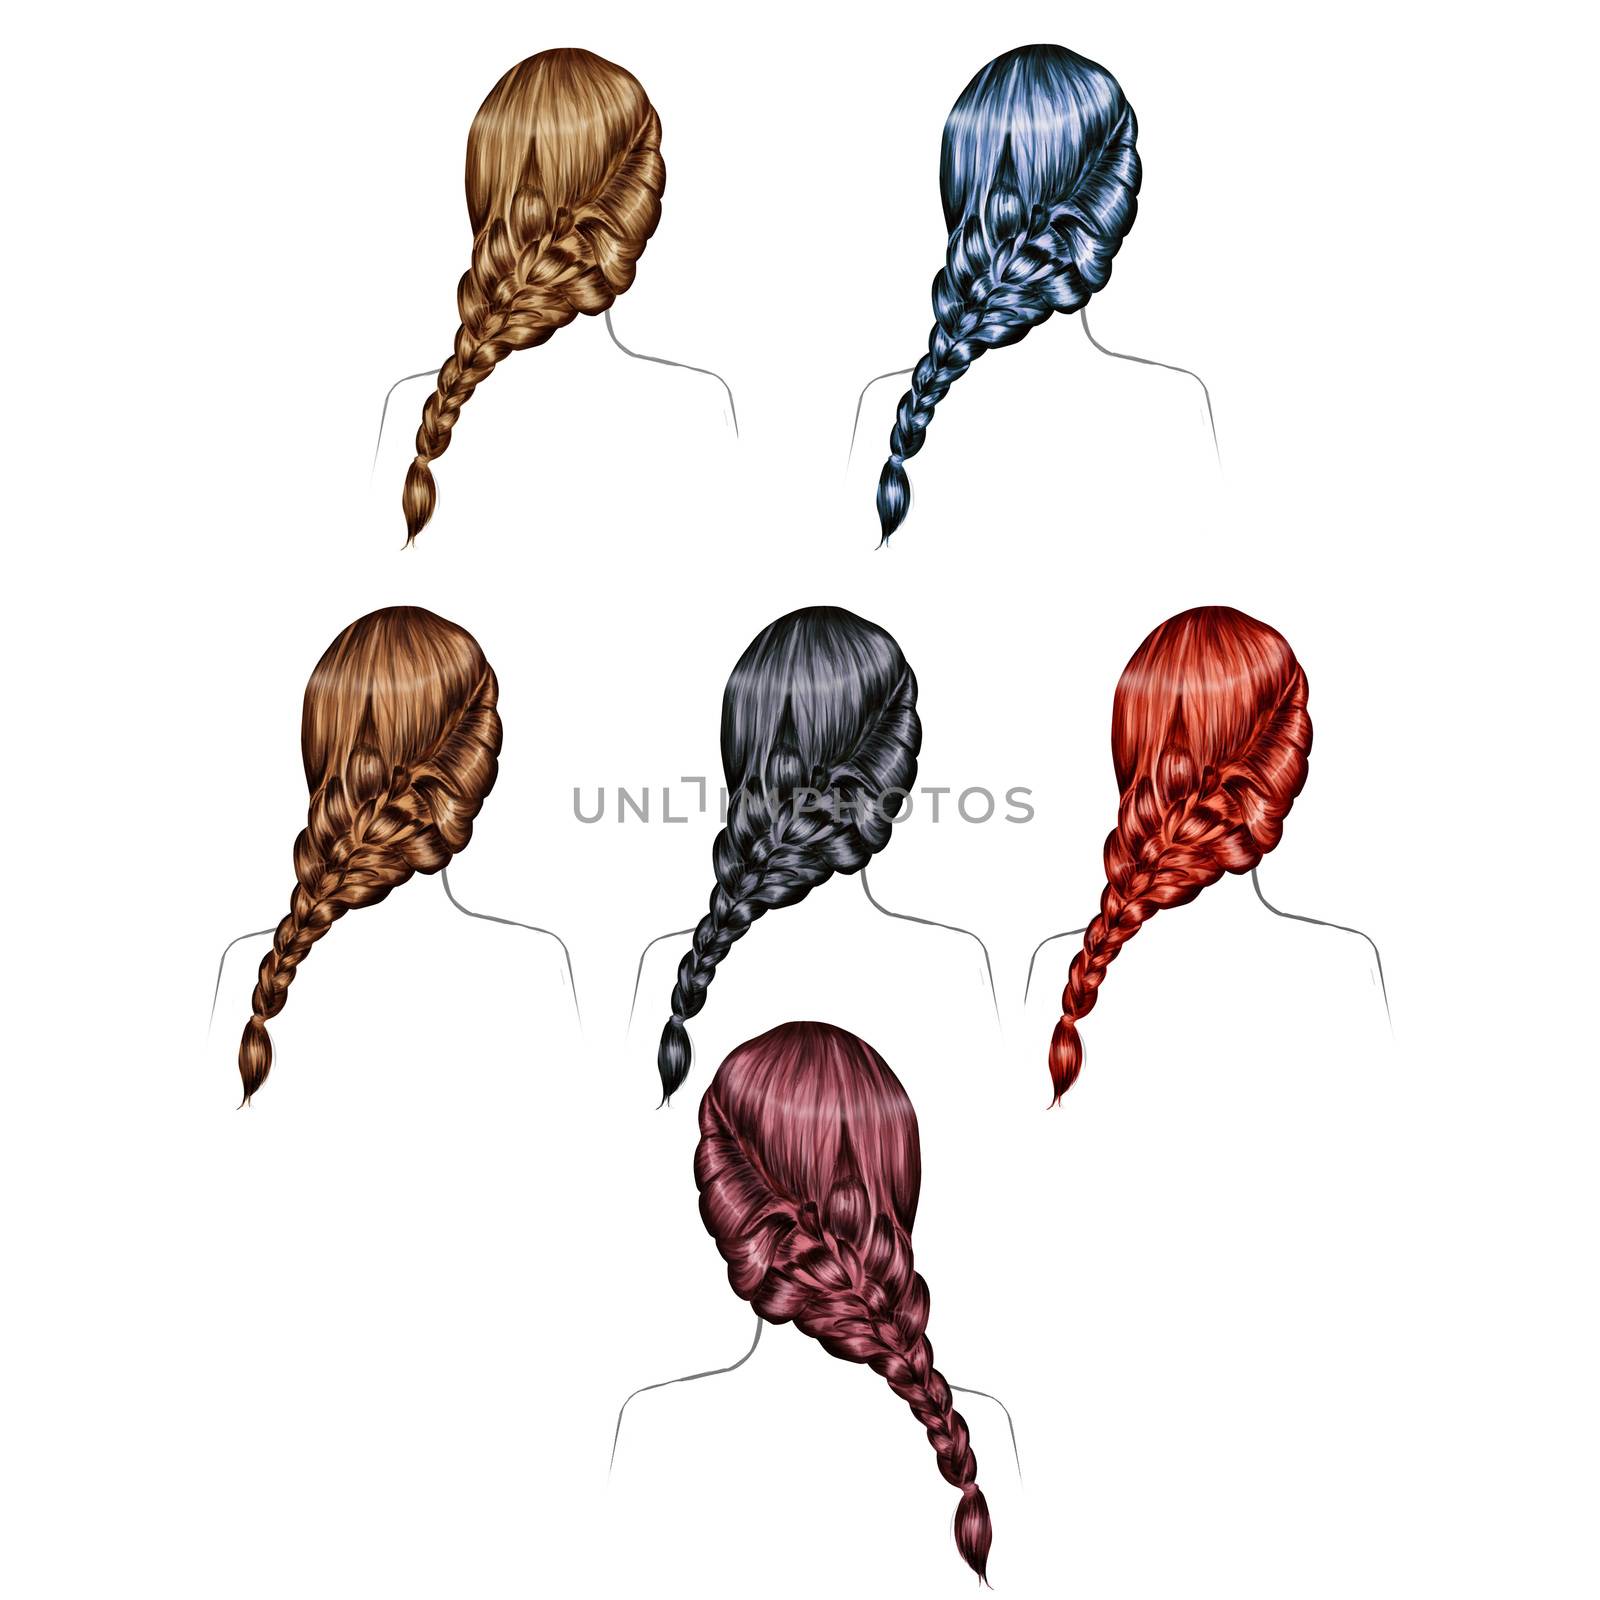 Illustration of woman hairstyles - woman hair - set - collection by GGillustrations